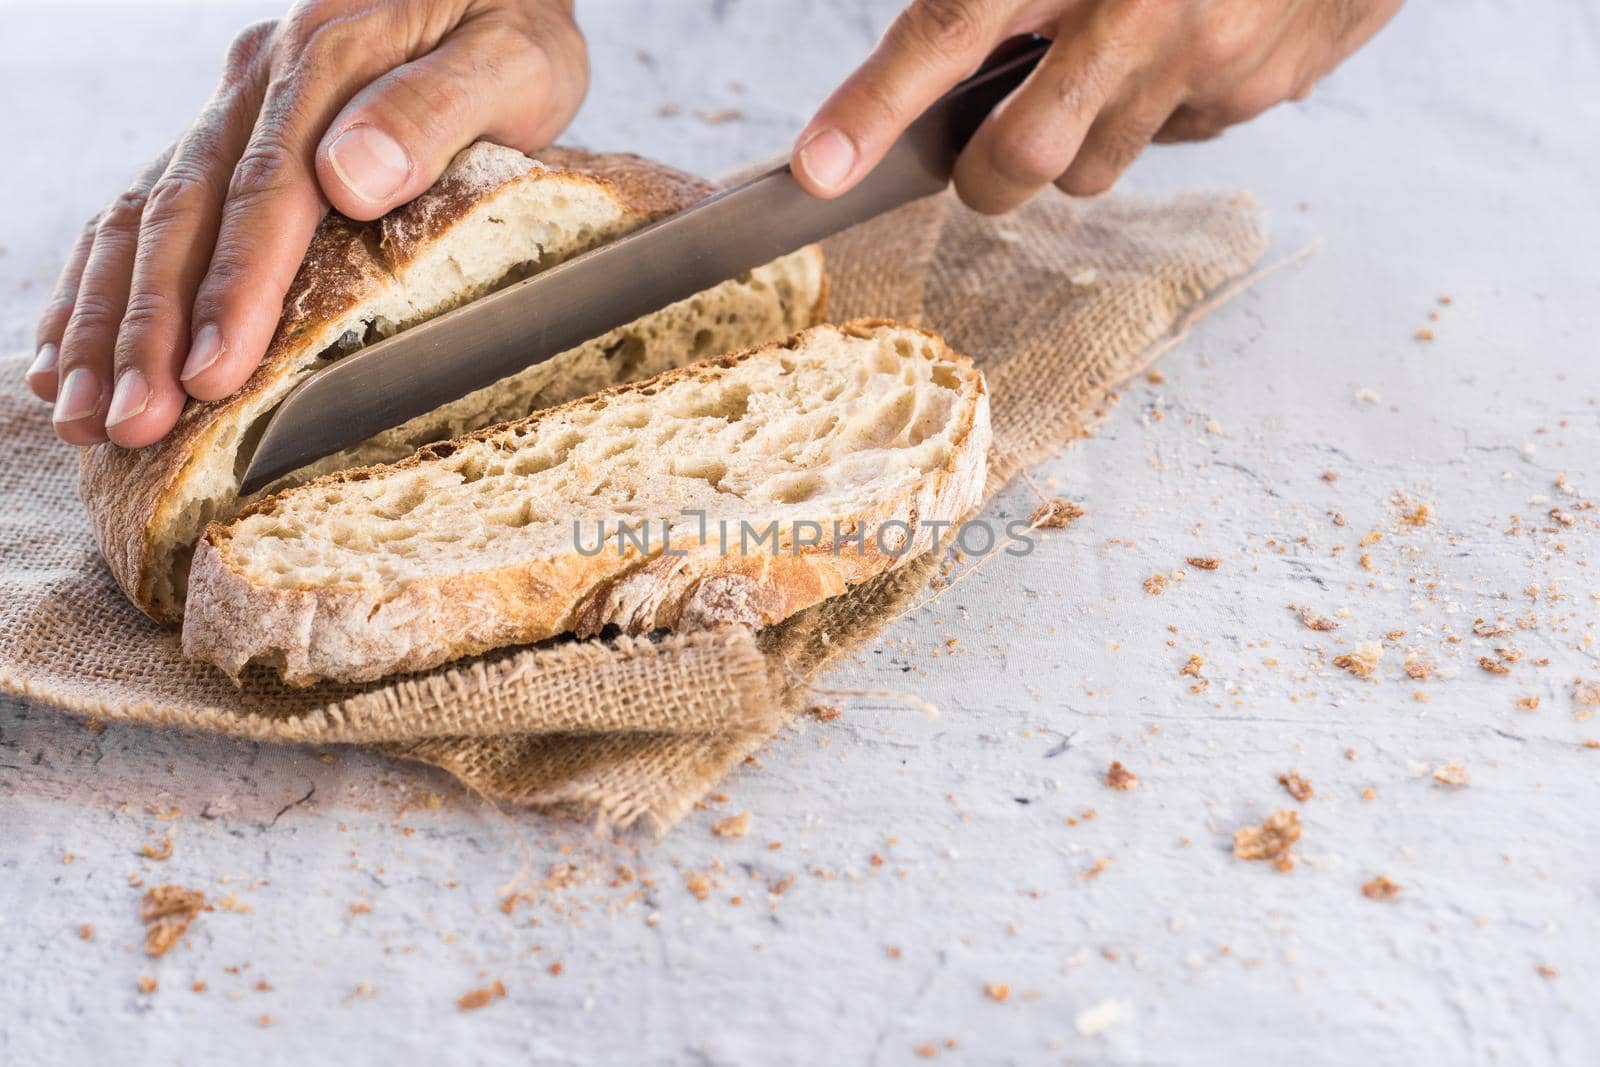 horizontal image of man's hands breaking organic bread in the foreground with knife surrounded by crumbs on white table with natural light